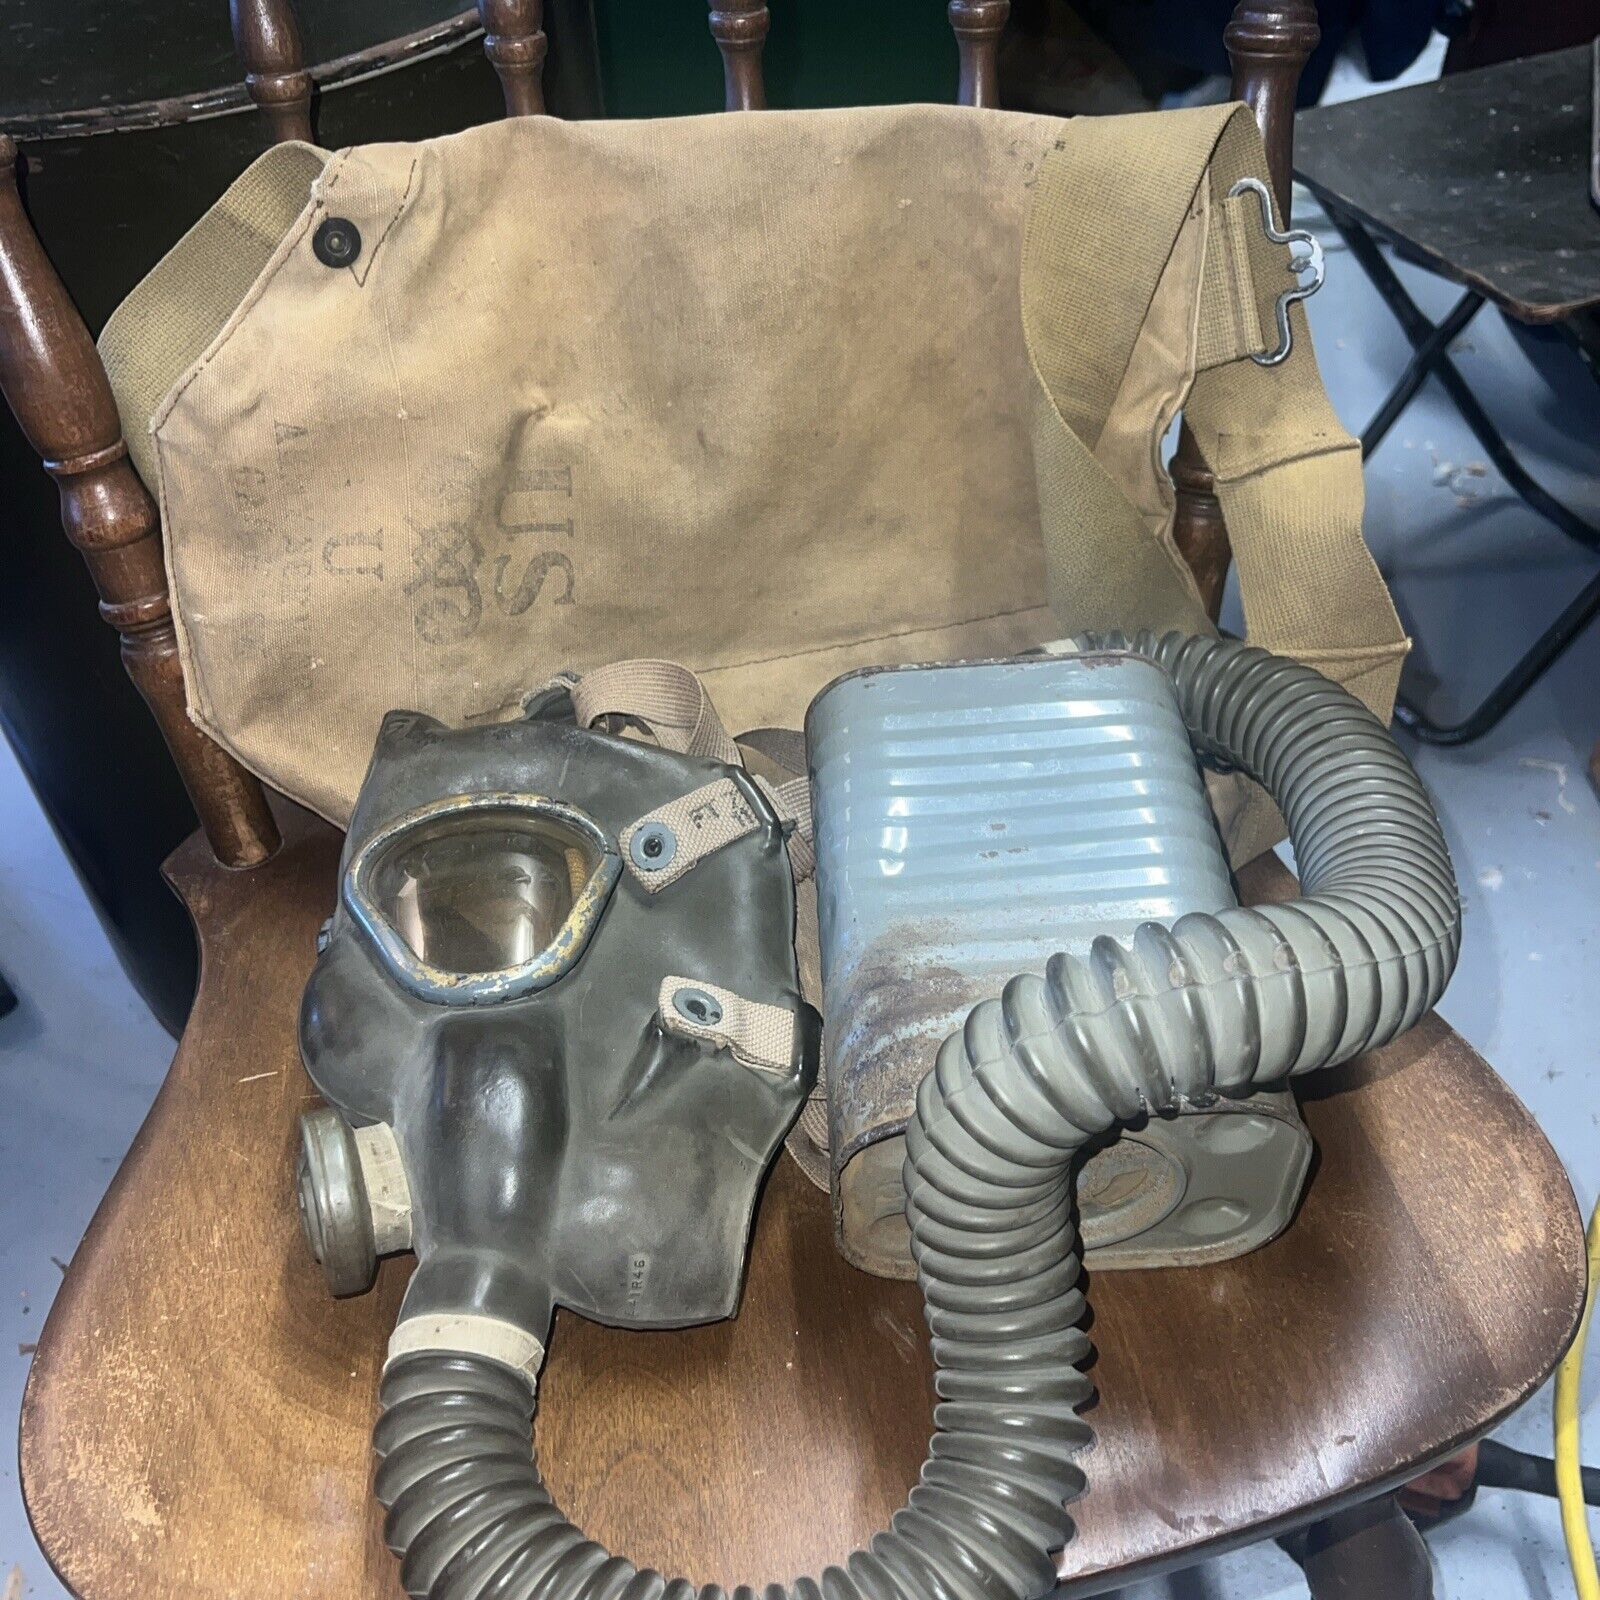 WW2 World War 2 II US Army Military Gas Mask With Canvas Carry Bag - Great Find